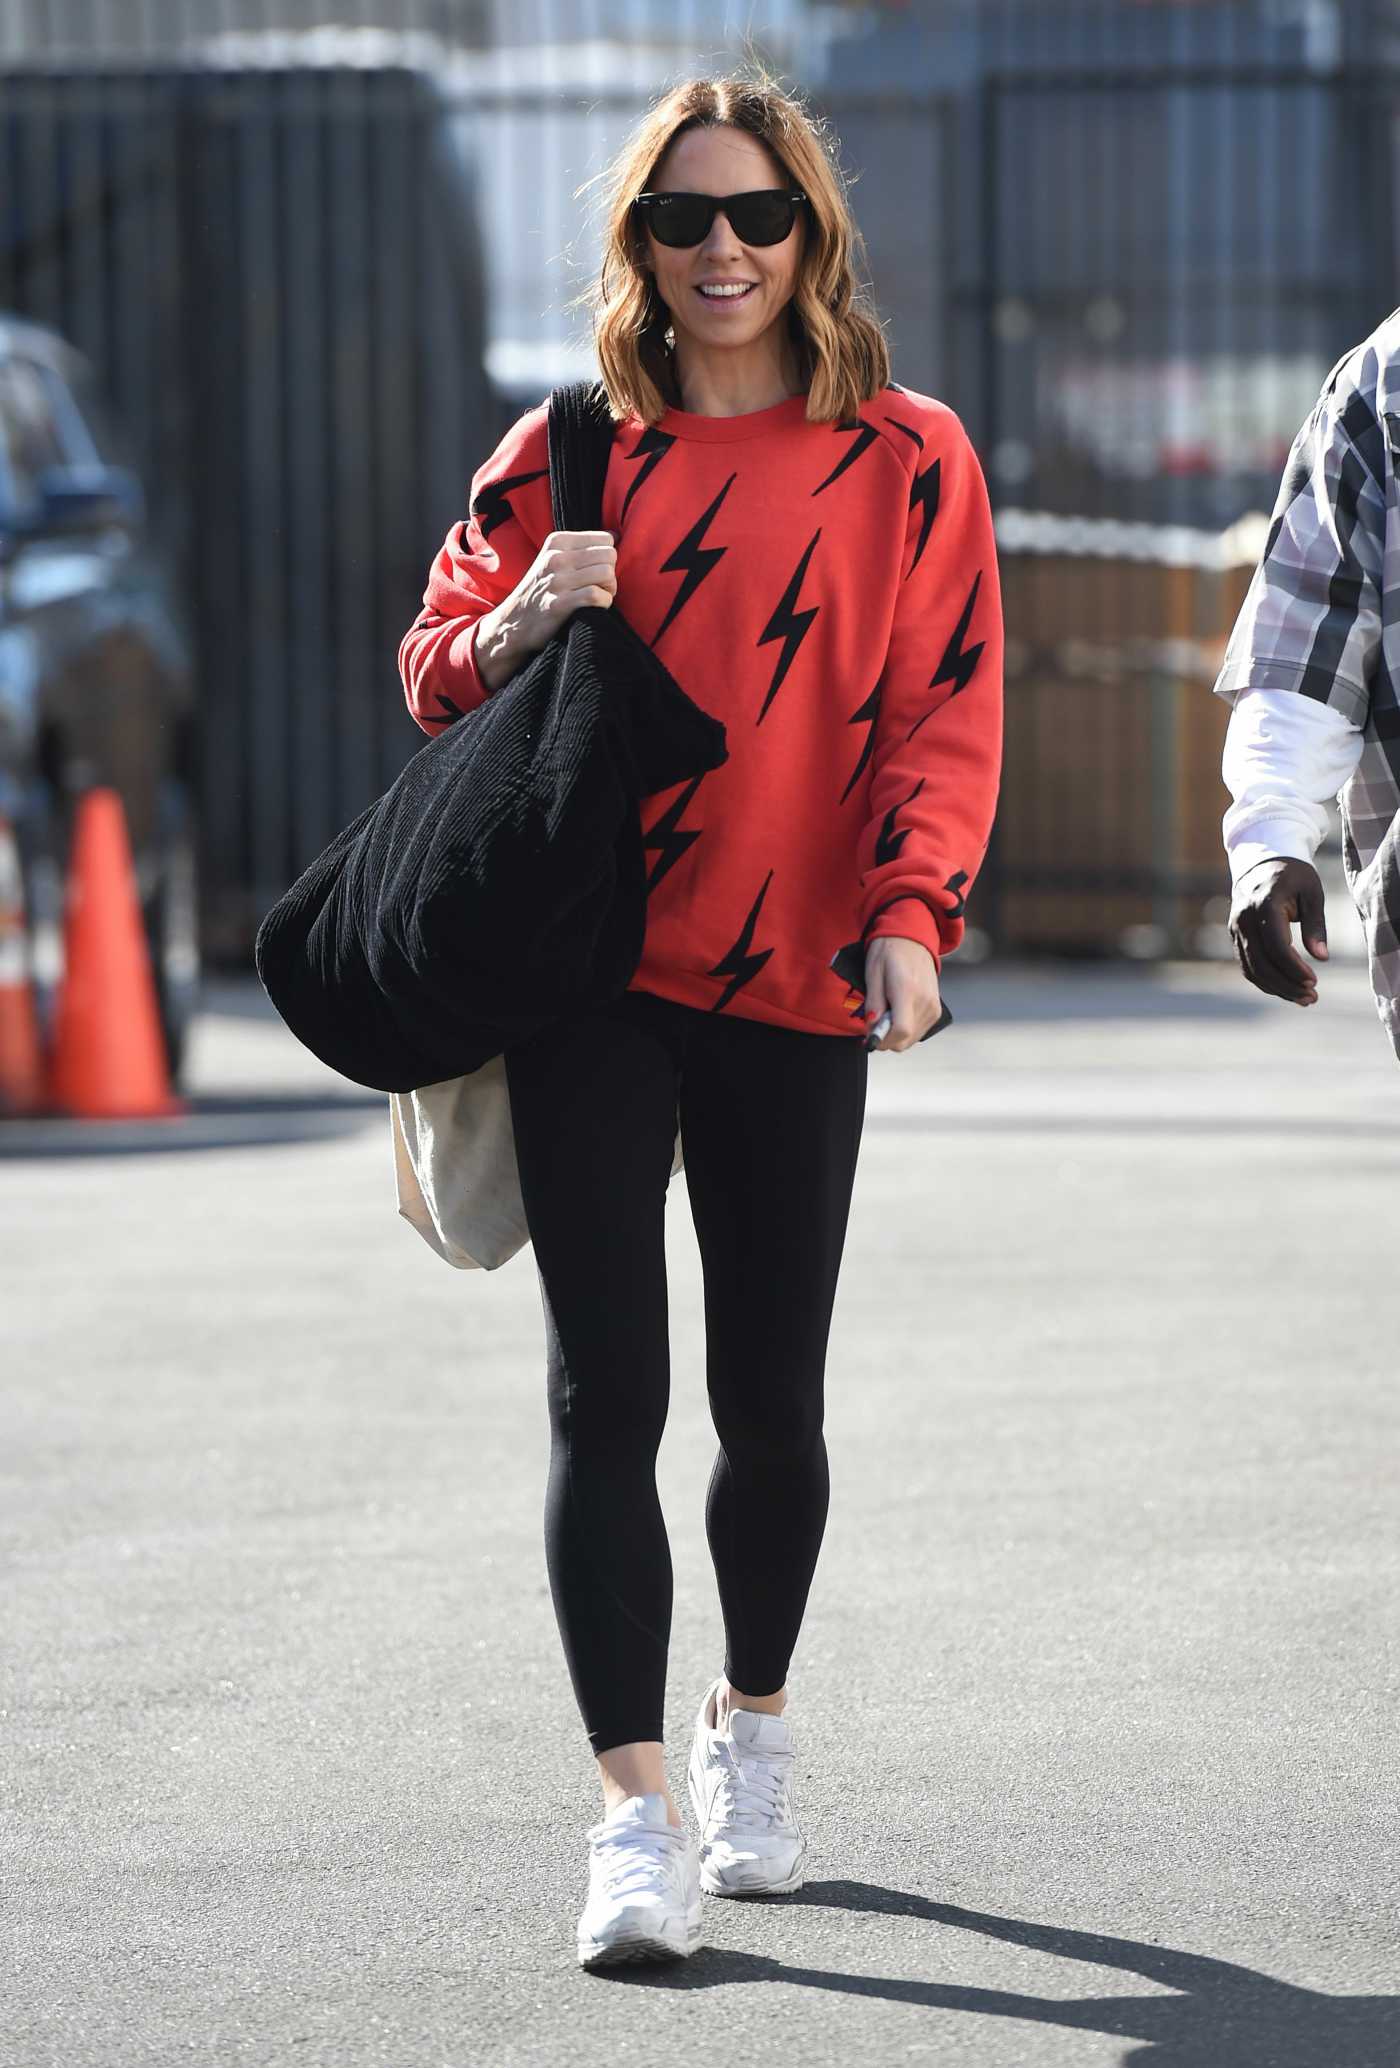 Melanie Chisholm in a Red Sweatshirt Arrives at the Dancing with the Stars Show Rehearsals in Los Angeles 10/13/2021